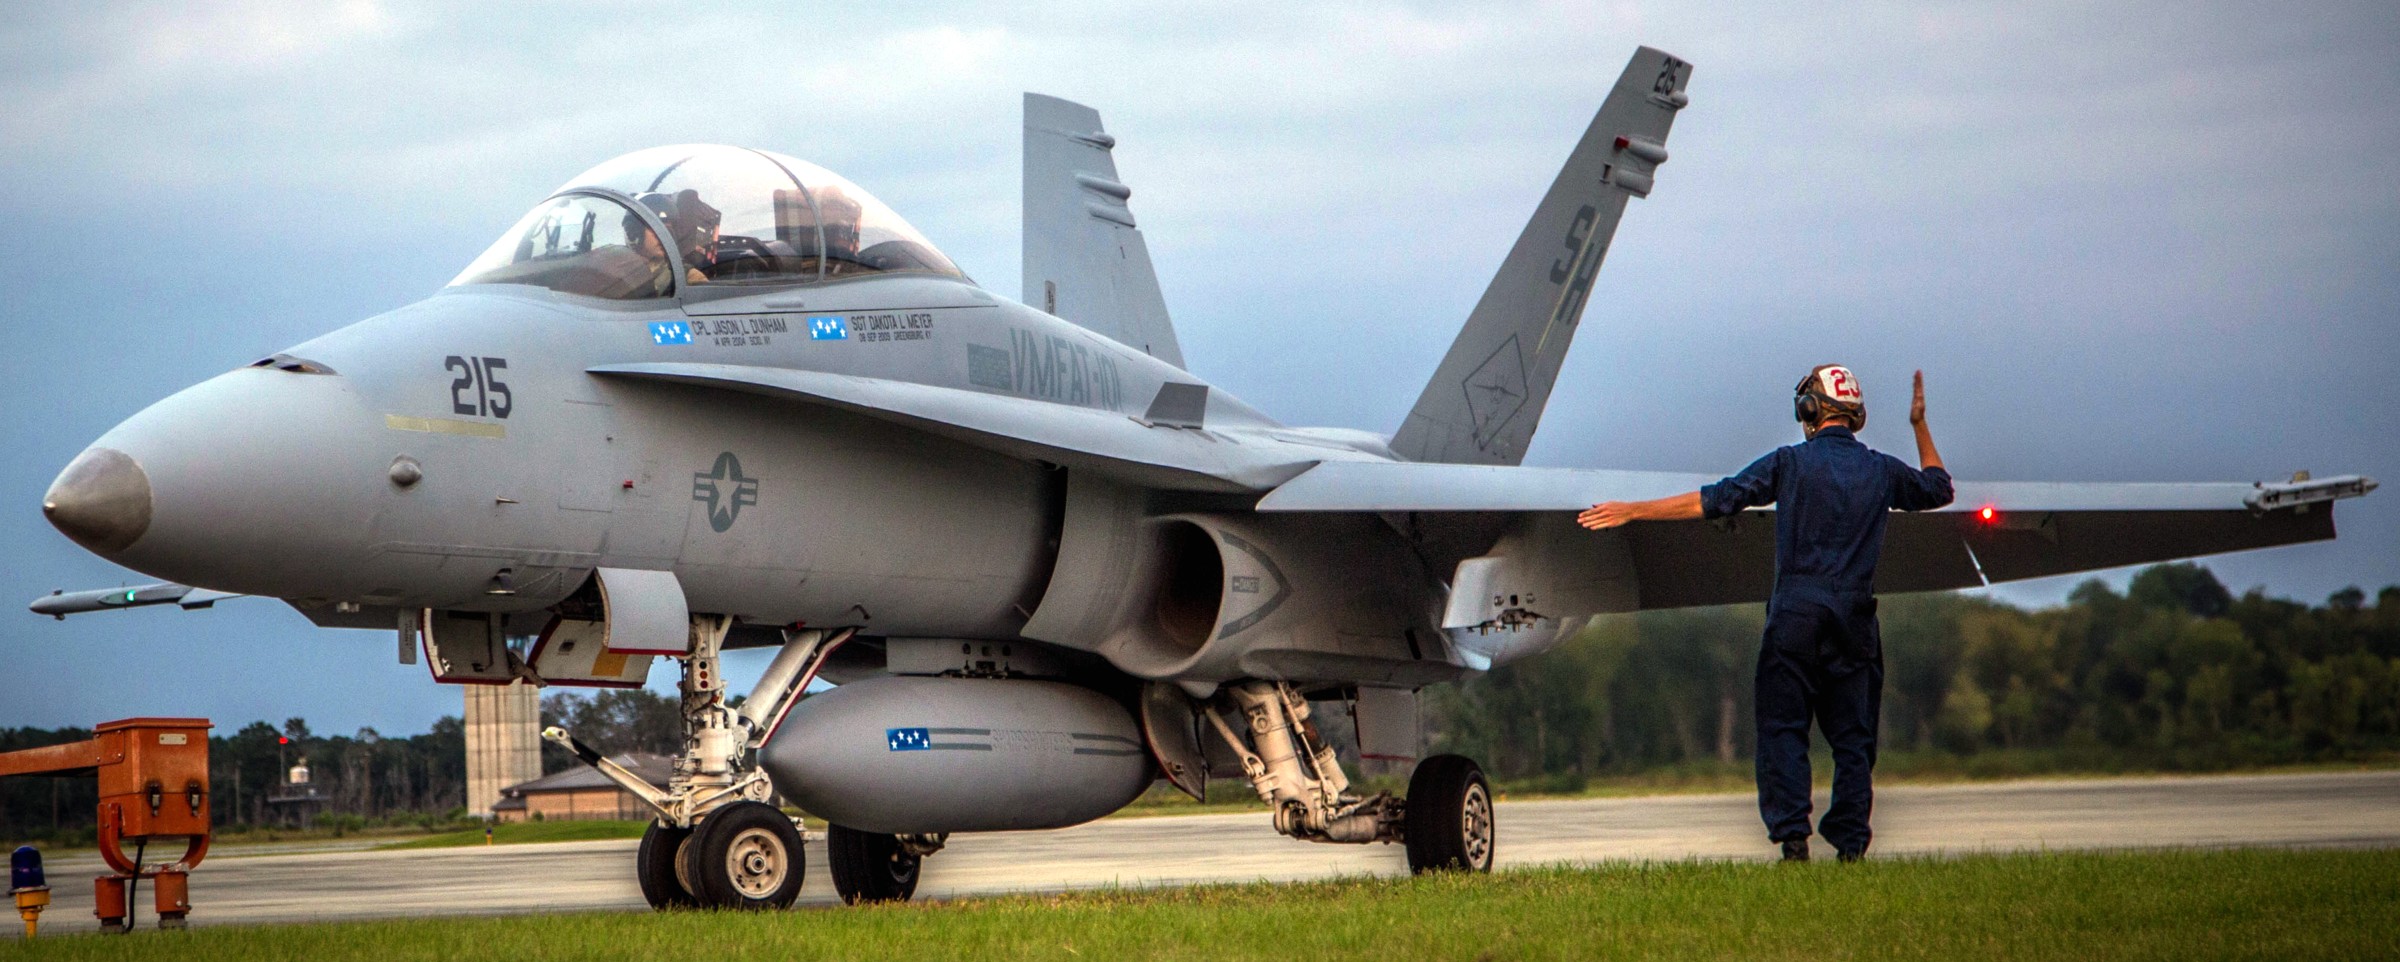 vmfat-101 sharpshooters marine fighter attack training squadron f/a-18b hornet 79